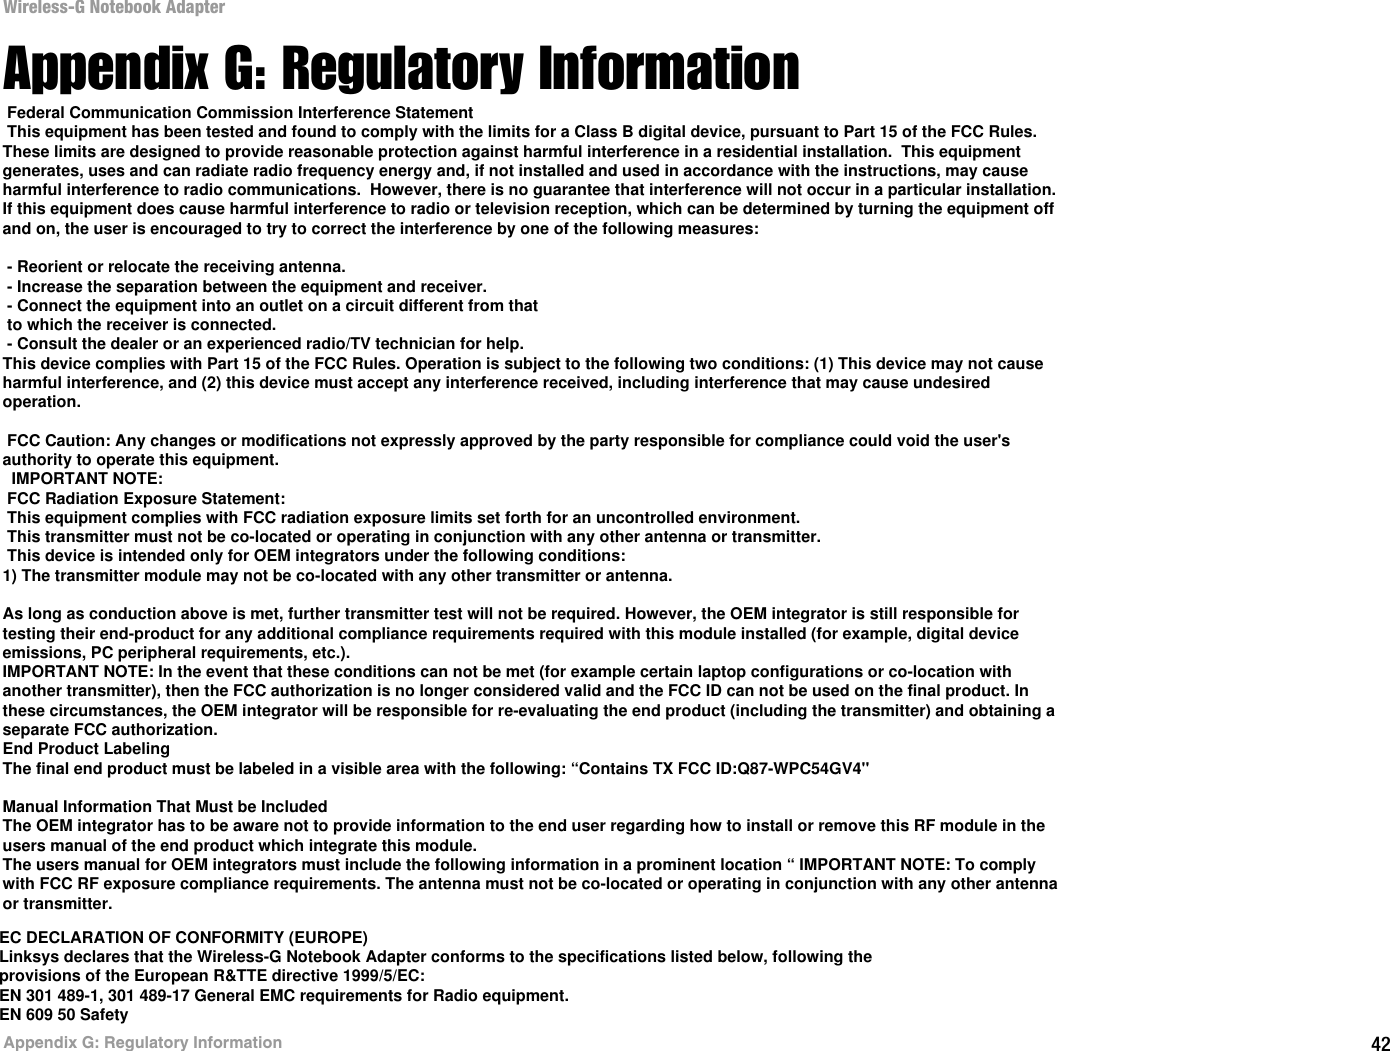 42Appendix G: Regulatory InformationWireless-G Notebook AdapterAppendix G: Regulatory InformationFCC STATEMENTThis product has been tested and complies with the specifications for a Class B digital device, pursuant to Part 15 of the FCC Rules. These limits are designed to provide reasonable protection against harmful interference in a residential installation. This equipment generates, uses, and can radiate radio frequency energy and, if not installed and used according to the instructions, may cause harmful interference to radio communications. However, there is no guarantee that interference will not occur in a particular installation. If this equipment does cause harmful interference to radio or television reception, which is found by turning the equipment off and on, the user is encouraged to try to correct the interference by one or more of the following measures:Reorient or relocate the receiving antennaIncrease the separation between the equipment or devicesConnect the equipment to an outlet other than the receiver&apos;sConsult a dealer or an experienced radio/TV technician for assistanceFCC Radiation Exposure StatementThis equipment complies with FCC radiation exposure limits set forth for an uncontrolled environment.  This equipment should be installed and operated with minimum distance 20cm between the radiator and your body.INDUSTRY CANADA (CANADA)This Class B digital apparatus complies with Canadian ICES-003.Cet appareil numérique de la classe B est conforme à la norme NMB-003 du Canada.The use of this device in a system operating either partially or completely outdoors may require the user to obtain a license for the system according to the Canadian regulations.EC DECLARATION OF CONFORMITY (EUROPE)Linksys declares that the Wireless-G Notebook Adapter conforms to the specifications listed below, following the provisions of the European R&amp;TTE directive 1999/5/EC: EN 301 489-1, 301 489-17 General EMC requirements for Radio equipment.EN 609 50 Safety Federal Communication Commission Interference Statement This equipment has been tested and found to comply with the limits for a Class B digital device, pursuant to Part 15 of the FCC Rules.These limits are designed to provide reasonable protection against harmful interference in a residential installation.  This equipment generates, uses and can radiate radio frequency energy and, if not installed and used in accordance with the instructions, may cause harmful interference to radio communications.  However, there is no guarantee that interference will not occur in a particular installation.If this equipment does cause harmful interference to radio or television reception, which can be determined by turning the equipment off and on, the user is encouraged to try to correct the interference by one of the following measures: - Reorient or relocate the receiving antenna. - Increase the separation between the equipment and receiver. - Connect the equipment into an outlet on a circuit different from that to which the receiver is connected. - Consult the dealer or an experienced radio/TV technician for help.This device complies with Part 15 of the FCC Rules. Operation is subject to the following two conditions: (1) This device may not cause harmful interference, and (2) this device must accept any interference received, including interference that may cause undesired operation. FCC Caution: Any changes or modifications not expressly approved by the party responsible for compliance could void the user&apos;s authority to operate this equipment.  IMPORTANT NOTE: FCC Radiation Exposure Statement: This equipment complies with FCC radiation exposure limits set forth for an uncontrolled environment.  This transmitter must not be co-located or operating in conjunction with any other antenna or transmitter. This device is intended only for OEM integrators under the following conditions:1) The transmitter module may not be co-located with any other transmitter or antenna.As long as conduction above is met, further transmitter test will not be required. However, the OEM integrator is still responsible for testing their end-product for any additional compliance requirements required with this module installed (for example, digital device emissions, PC peripheral requirements, etc.).IMPORTANT NOTE: In the event that these conditions can not be met (for example certain laptop configurations or co-location with another transmitter), then the FCC authorization is no longer considered valid and the FCC ID can not be used on the final product. In these circumstances, the OEM integrator will be responsible for re-evaluating the end product (including the transmitter) and obtaining a separate FCC authorization.End Product LabelingThe final end product must be labeled in a visible area with the following: “Contains TX FCC ID:Q87-WPC54GV4&apos;&apos;Manual Information That Must be IncludedThe OEM integrator has to be aware not to provide information to the end user regarding how to install or remove this RF module in the users manual of the end product which integrate this module.The users manual for OEM integrators must include the following information in a prominent location “ IMPORTANT NOTE: To comply with FCC RF exposure compliance requirements. The antenna must not be co-located or operating in conjunction with any other antenna or transmitter.EC DECLARATION OF CONFORMITY (EUROPE)Linksys declares that the Wireless-G Notebook Adapter conforms to the specifications listed below, following theprovisions of the European R&amp;TTE directive 1999/5/EC:EN 301 489-1, 301 489-17 General EMC requirements for Radio equipment.EN 609 50 Safety